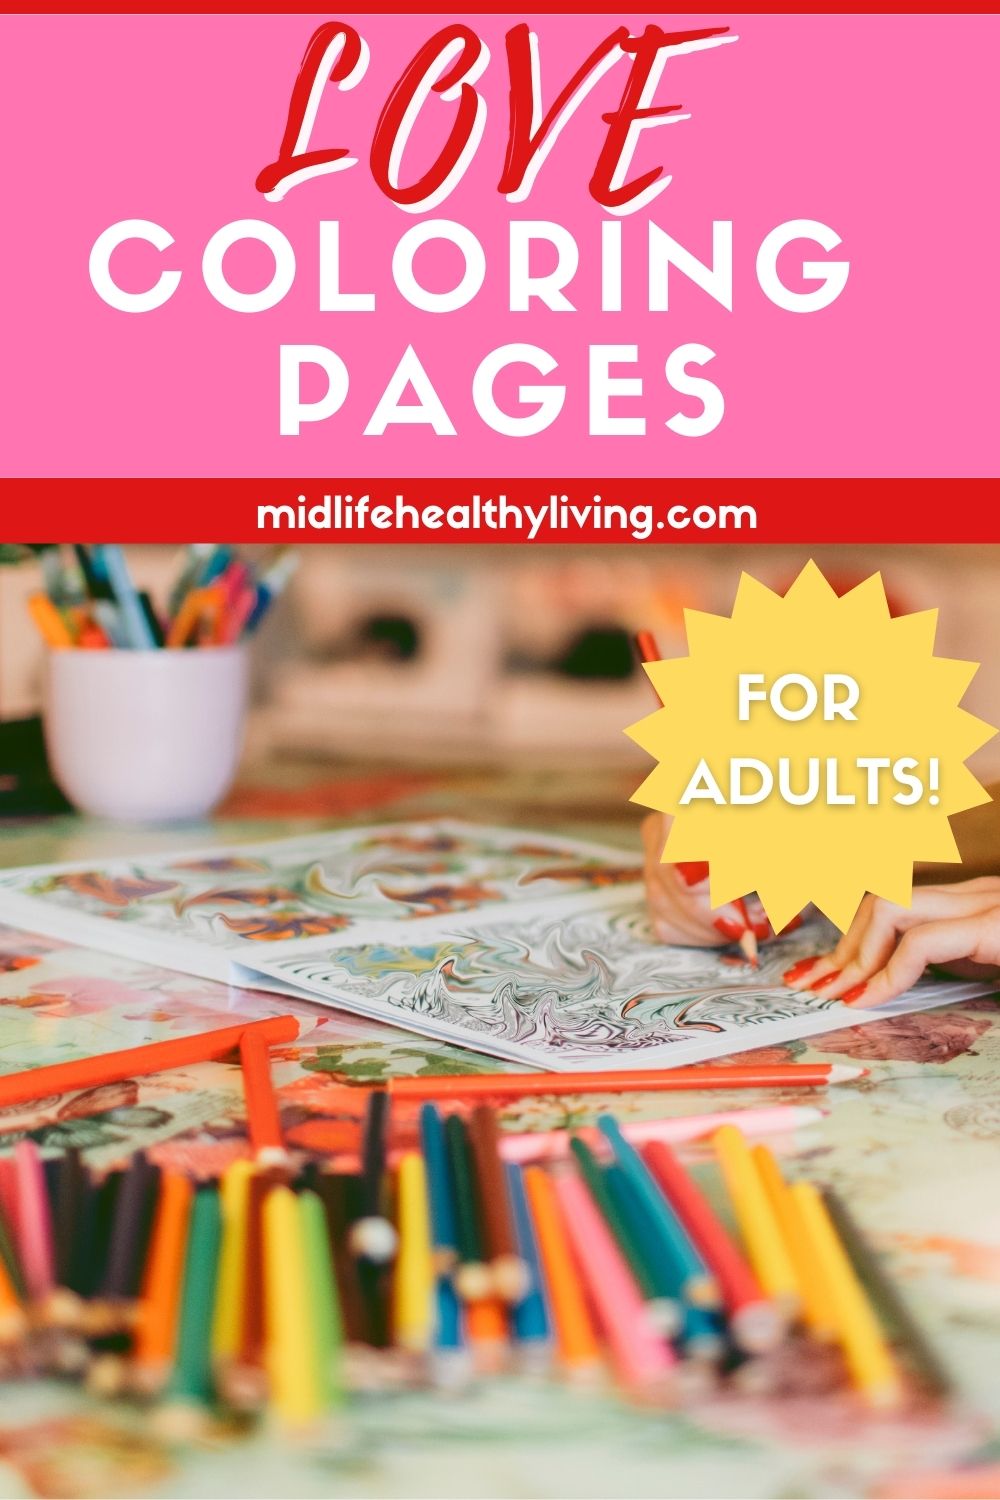 Pin image of coloring pages and pencil crayons. It says Love Coloring Pages for Adults